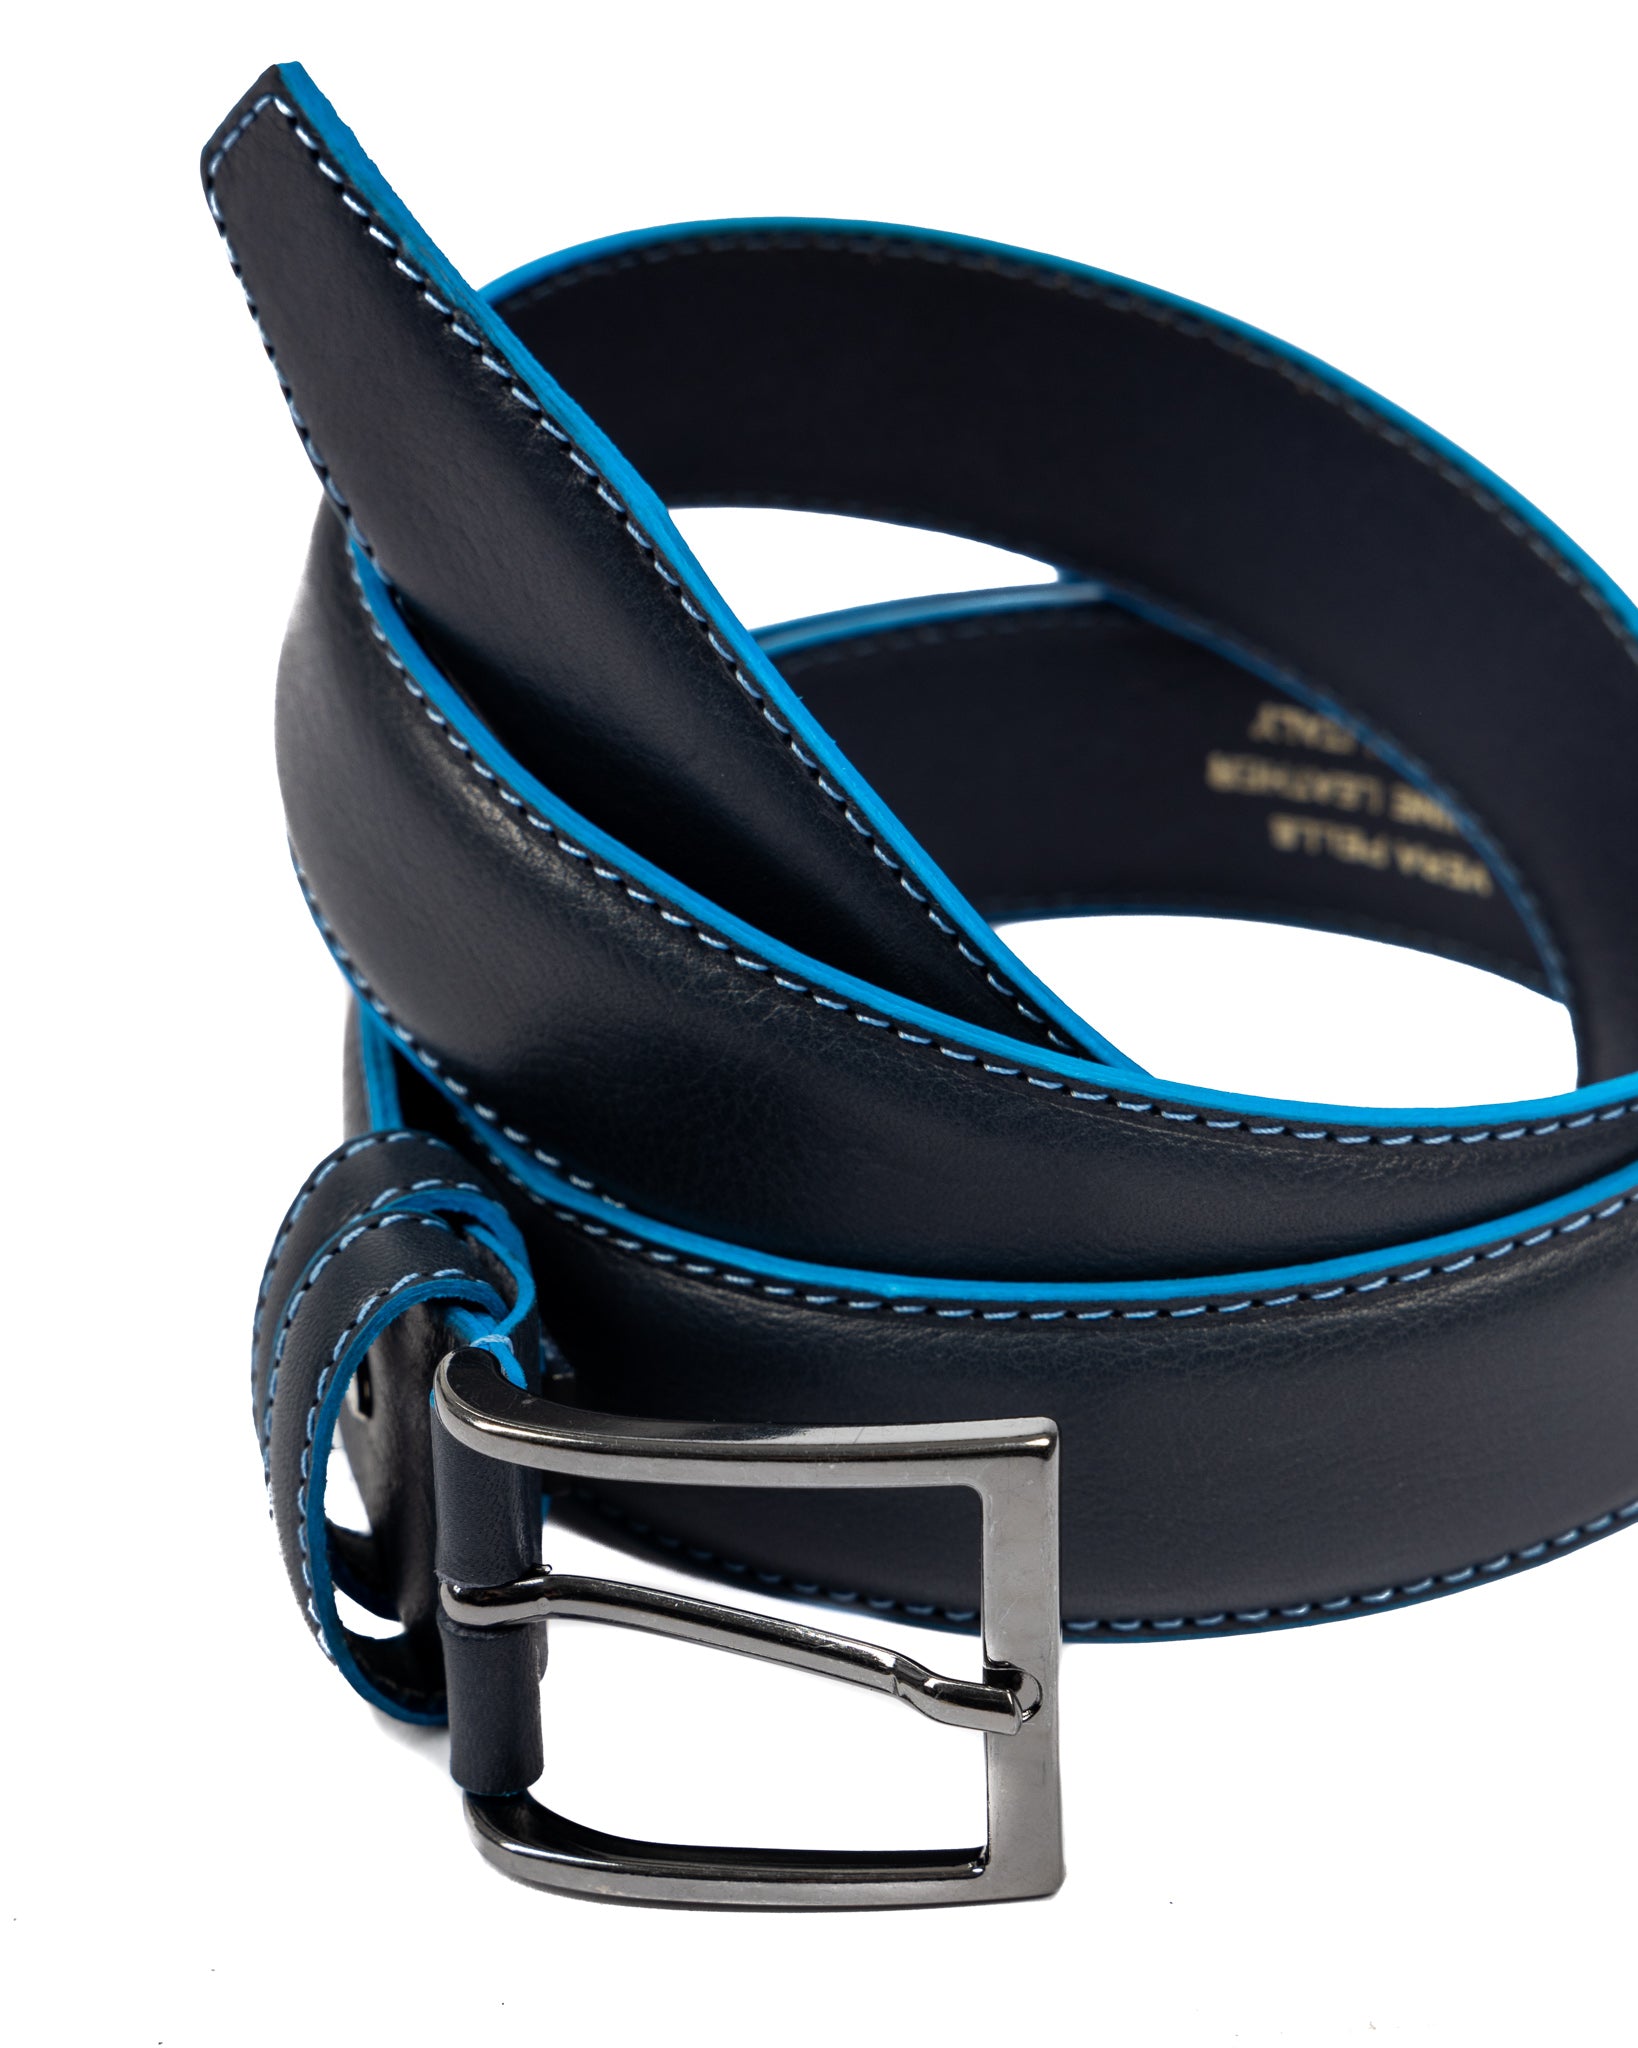 Pienza - blue leather belt with contrasting stitching